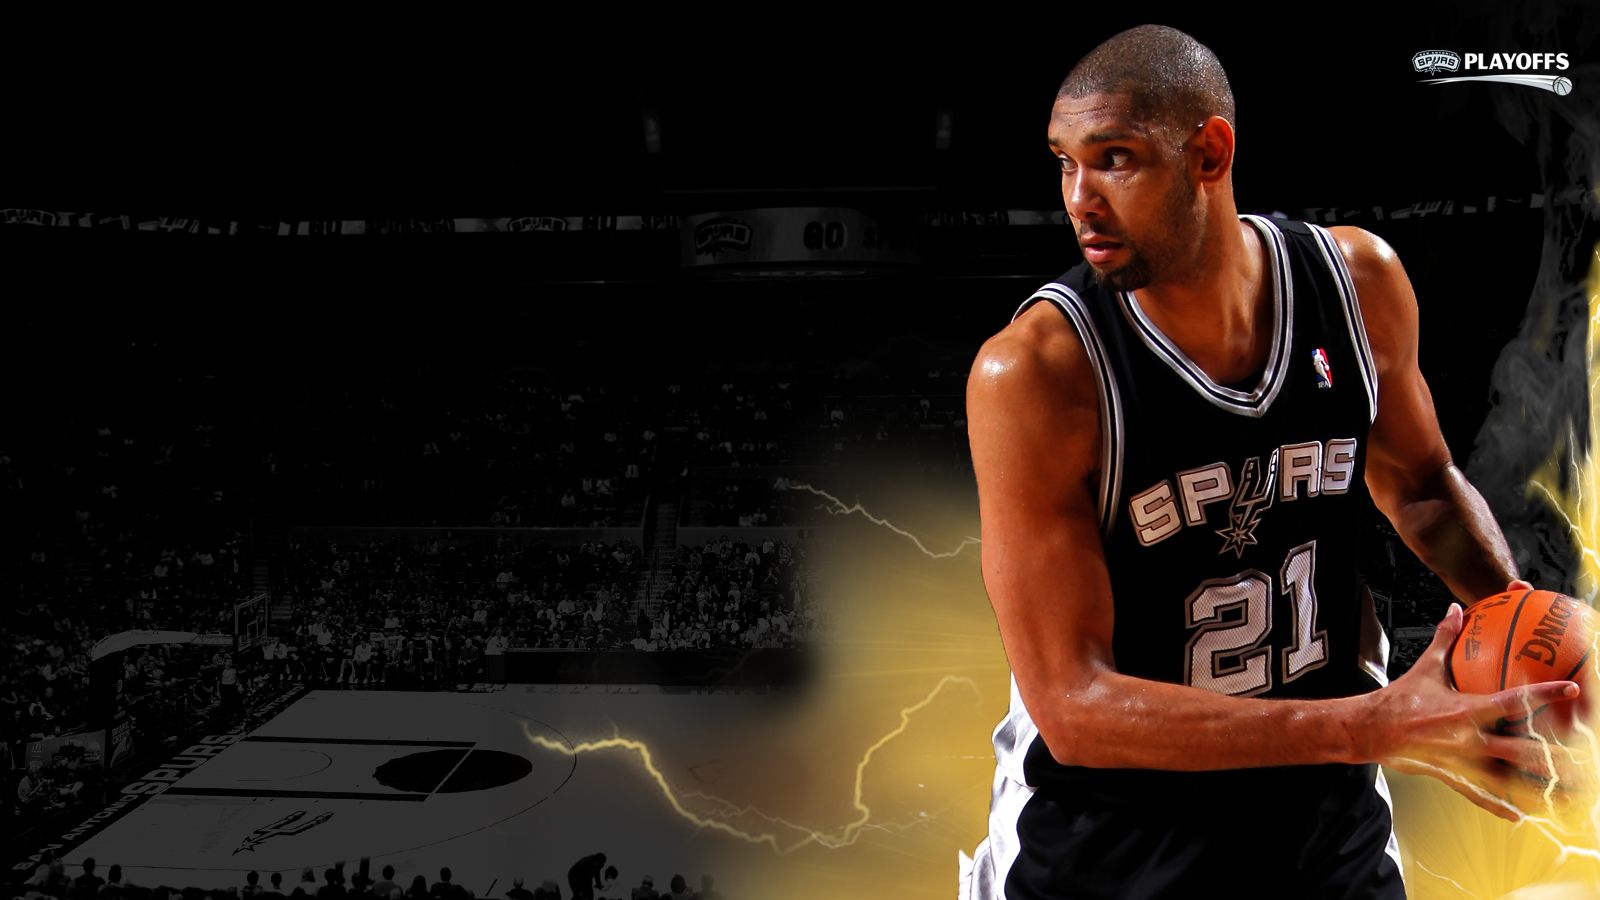 Desktop Playoff Wallpapers | THE OFFICIAL SITE OF THE SAN ANTONIO ...